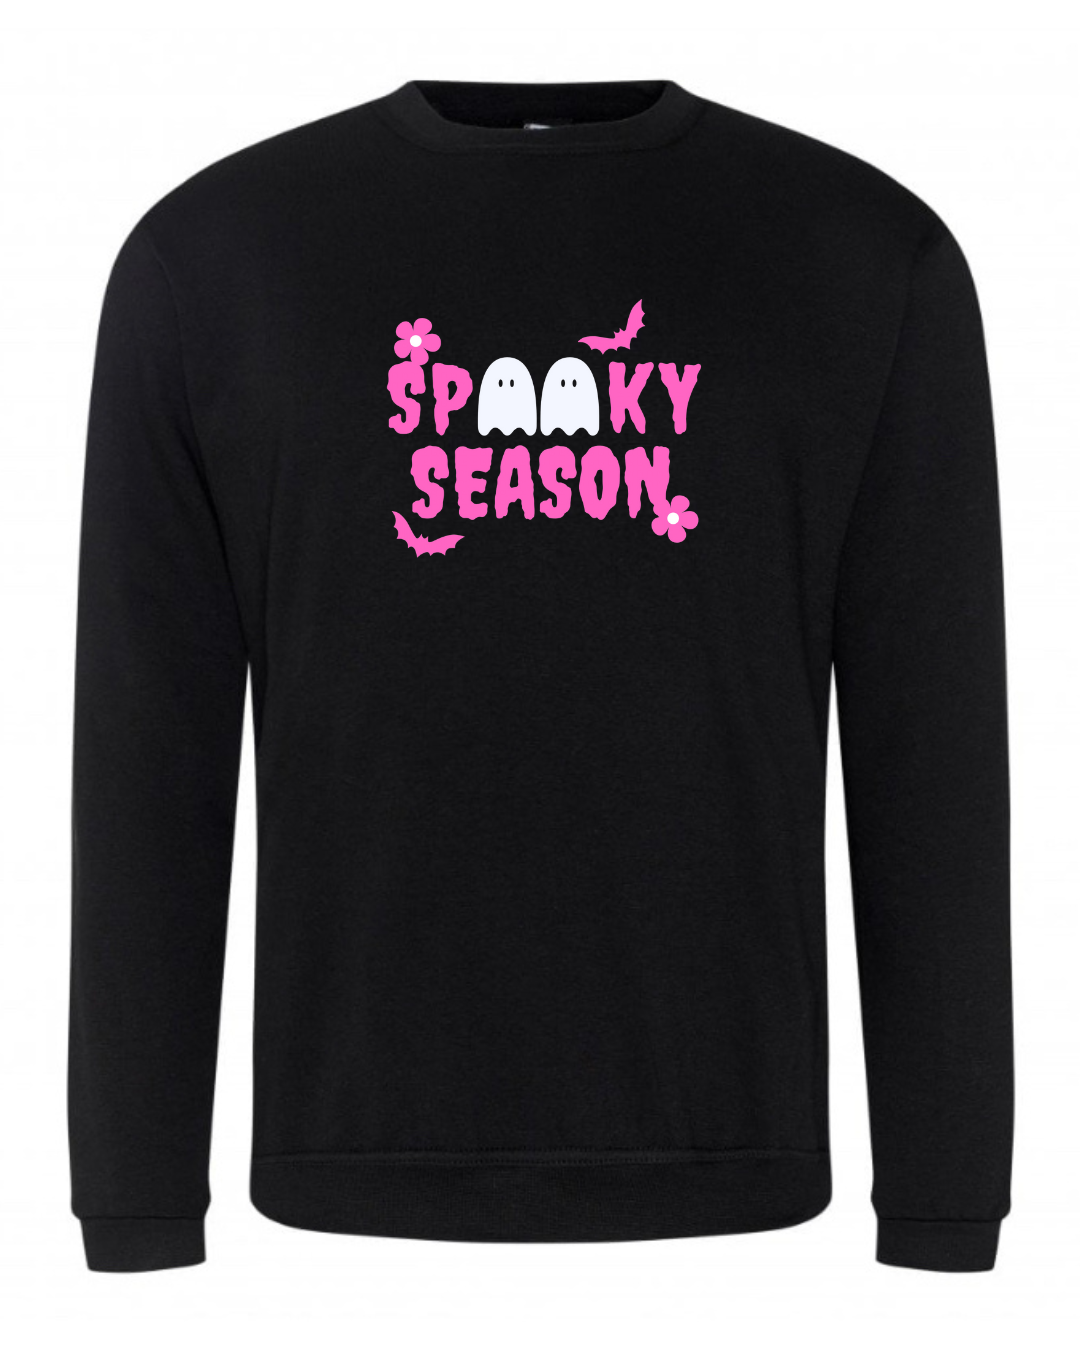 Custom order for Jennie - Spooky Season embroidered sweatshirt as pictured